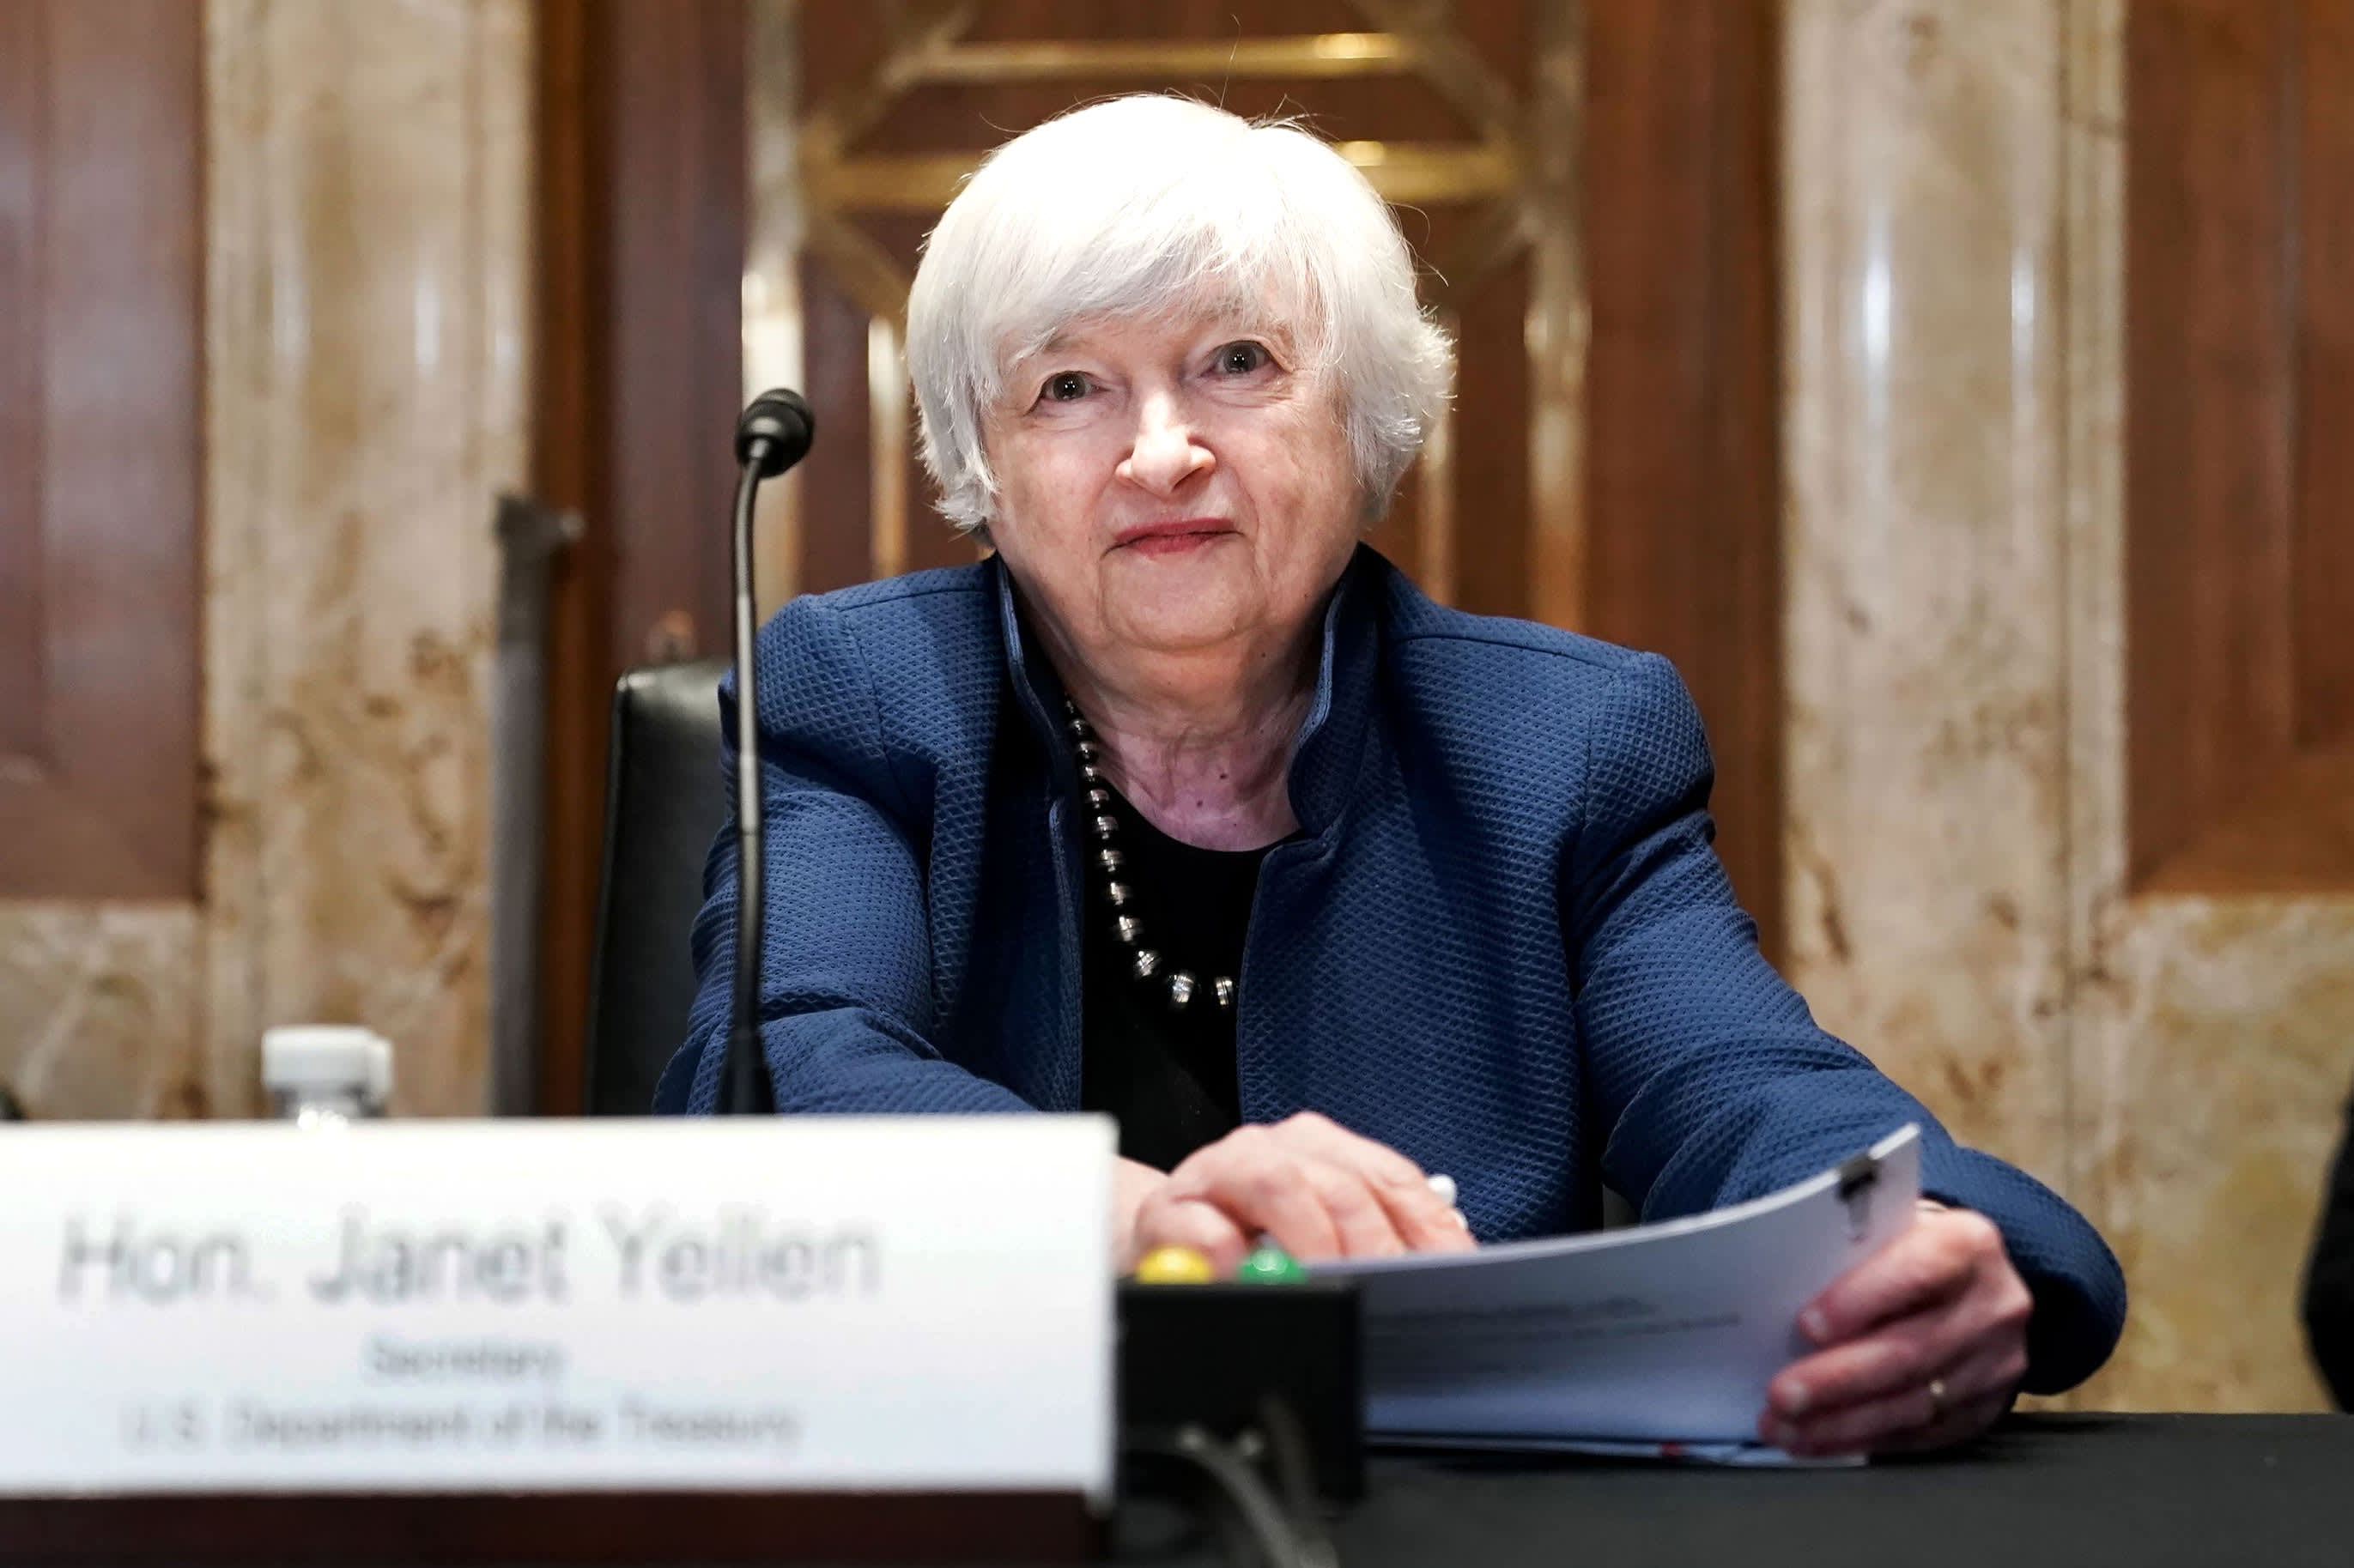 Congress must raise the debt limit by Oct. 18, Treasury Secretary Yellen warns in new letter as potential default looms